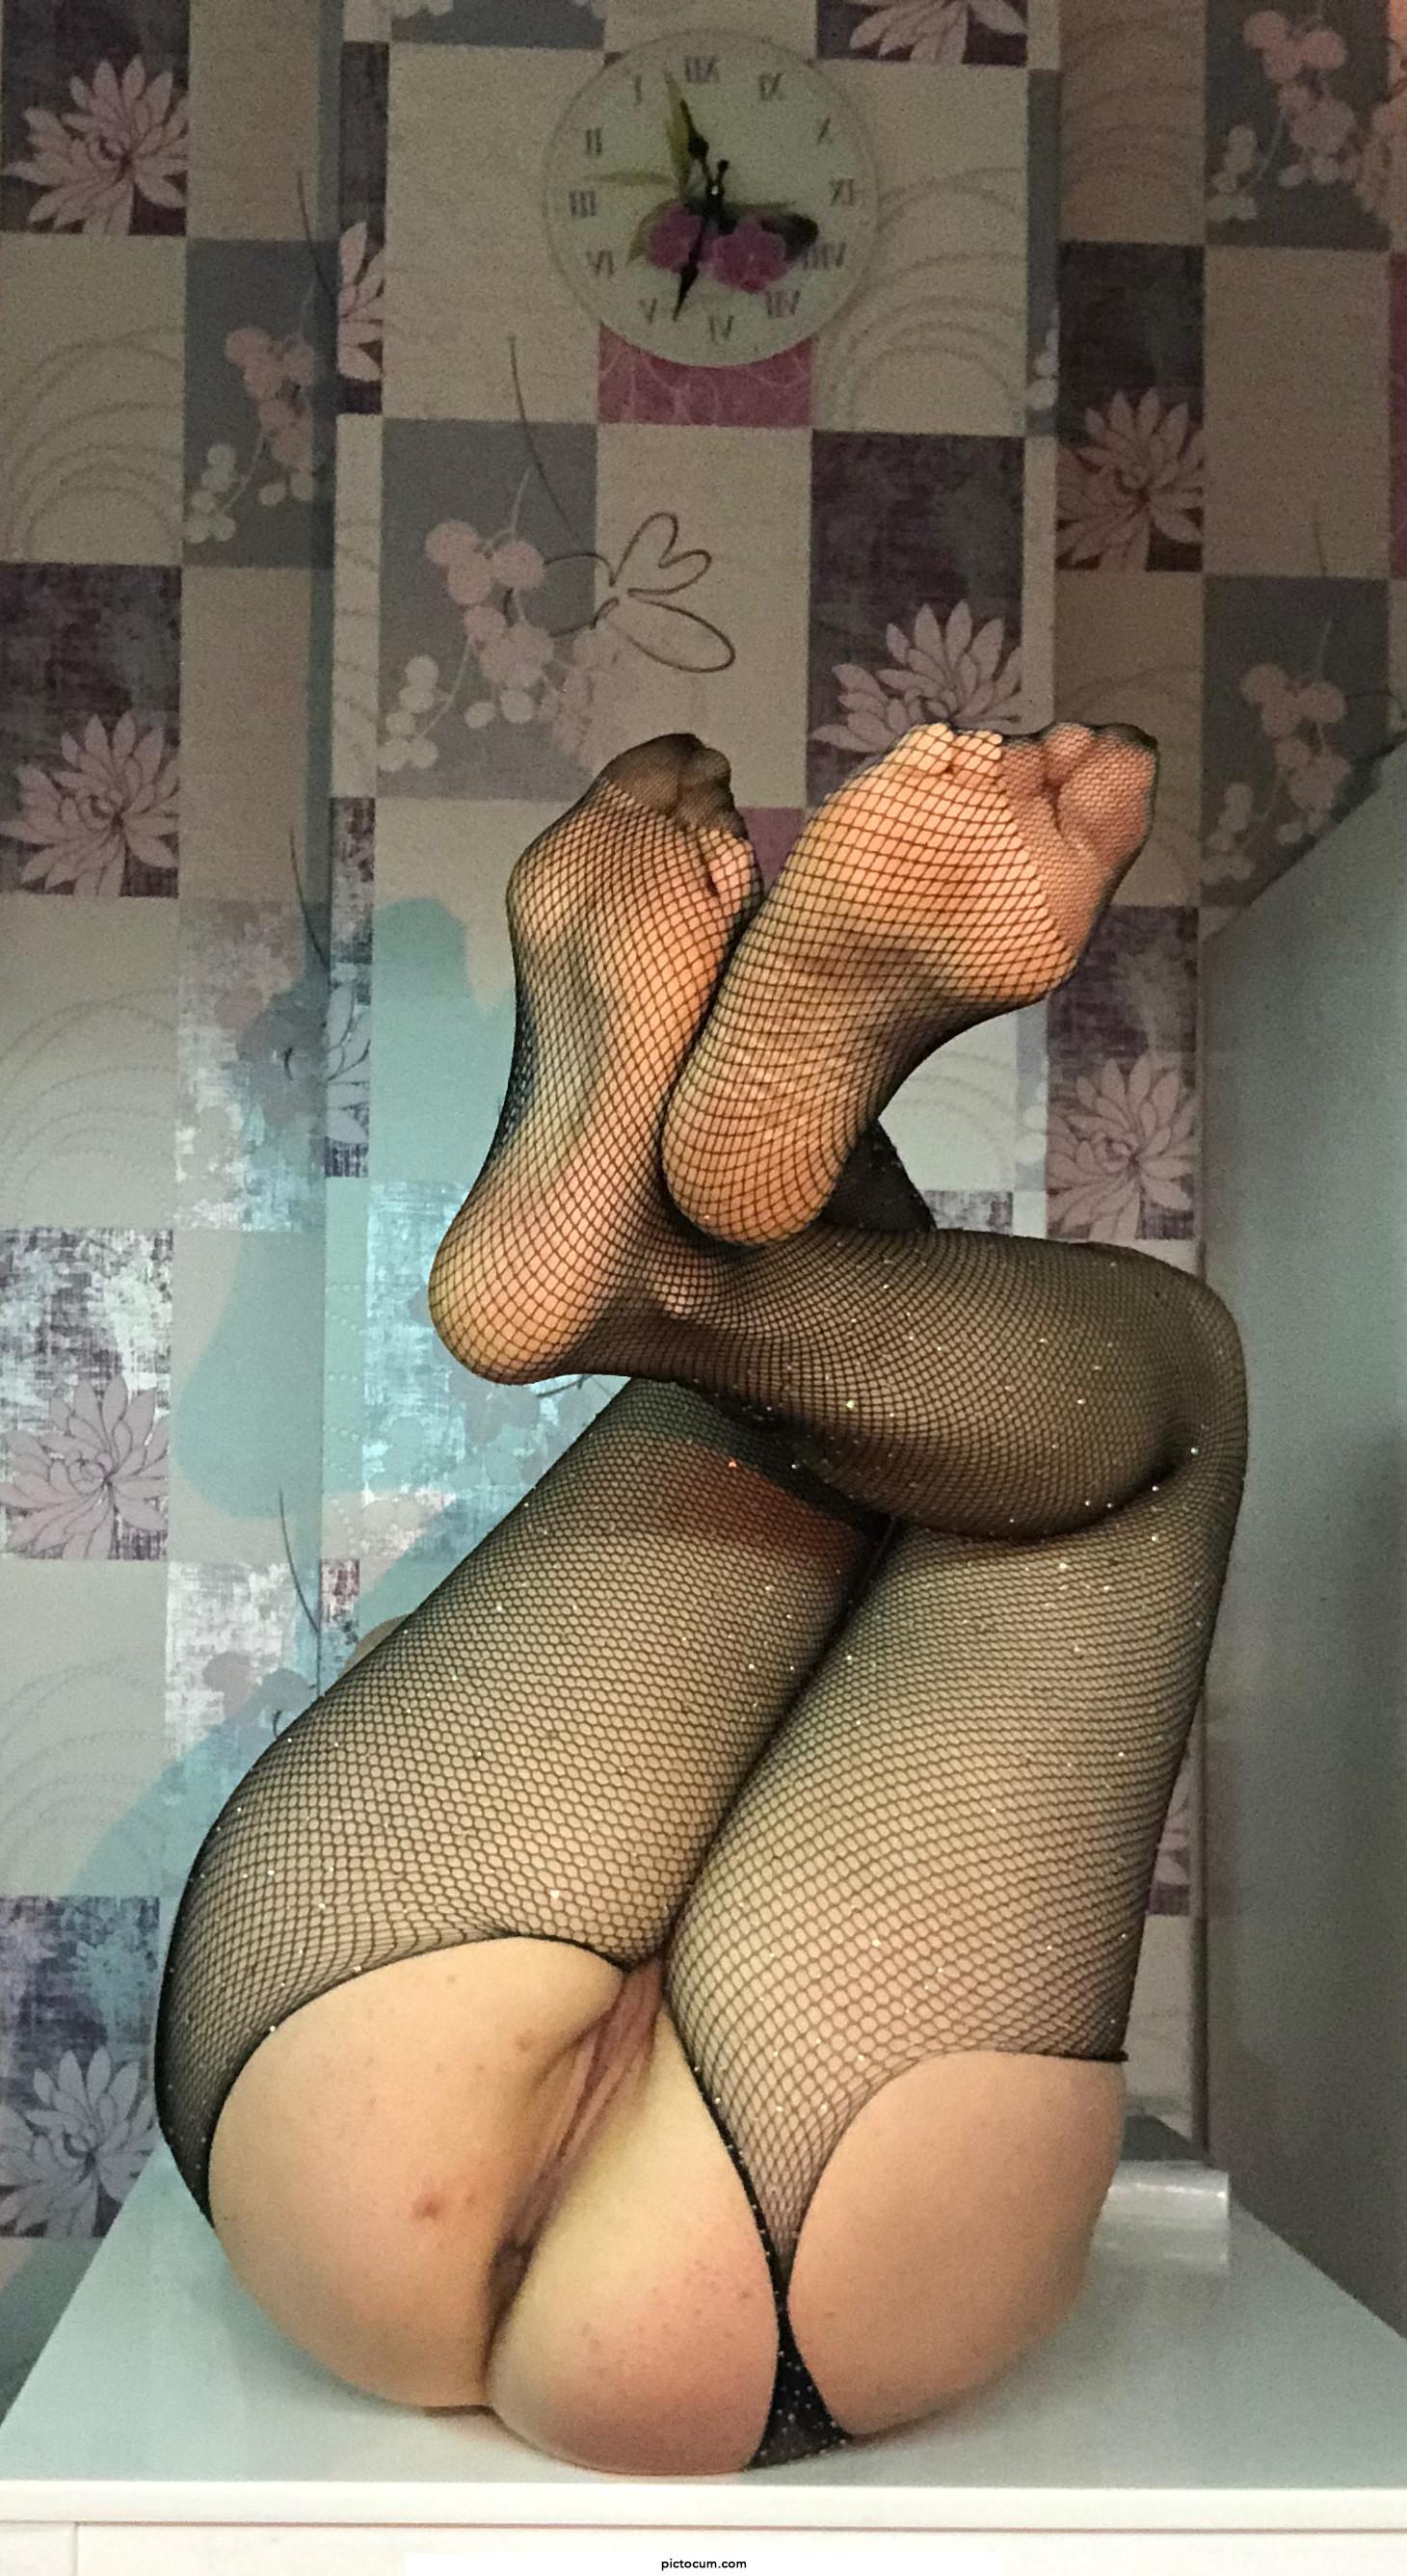 I want to masturbate your cock with my feet